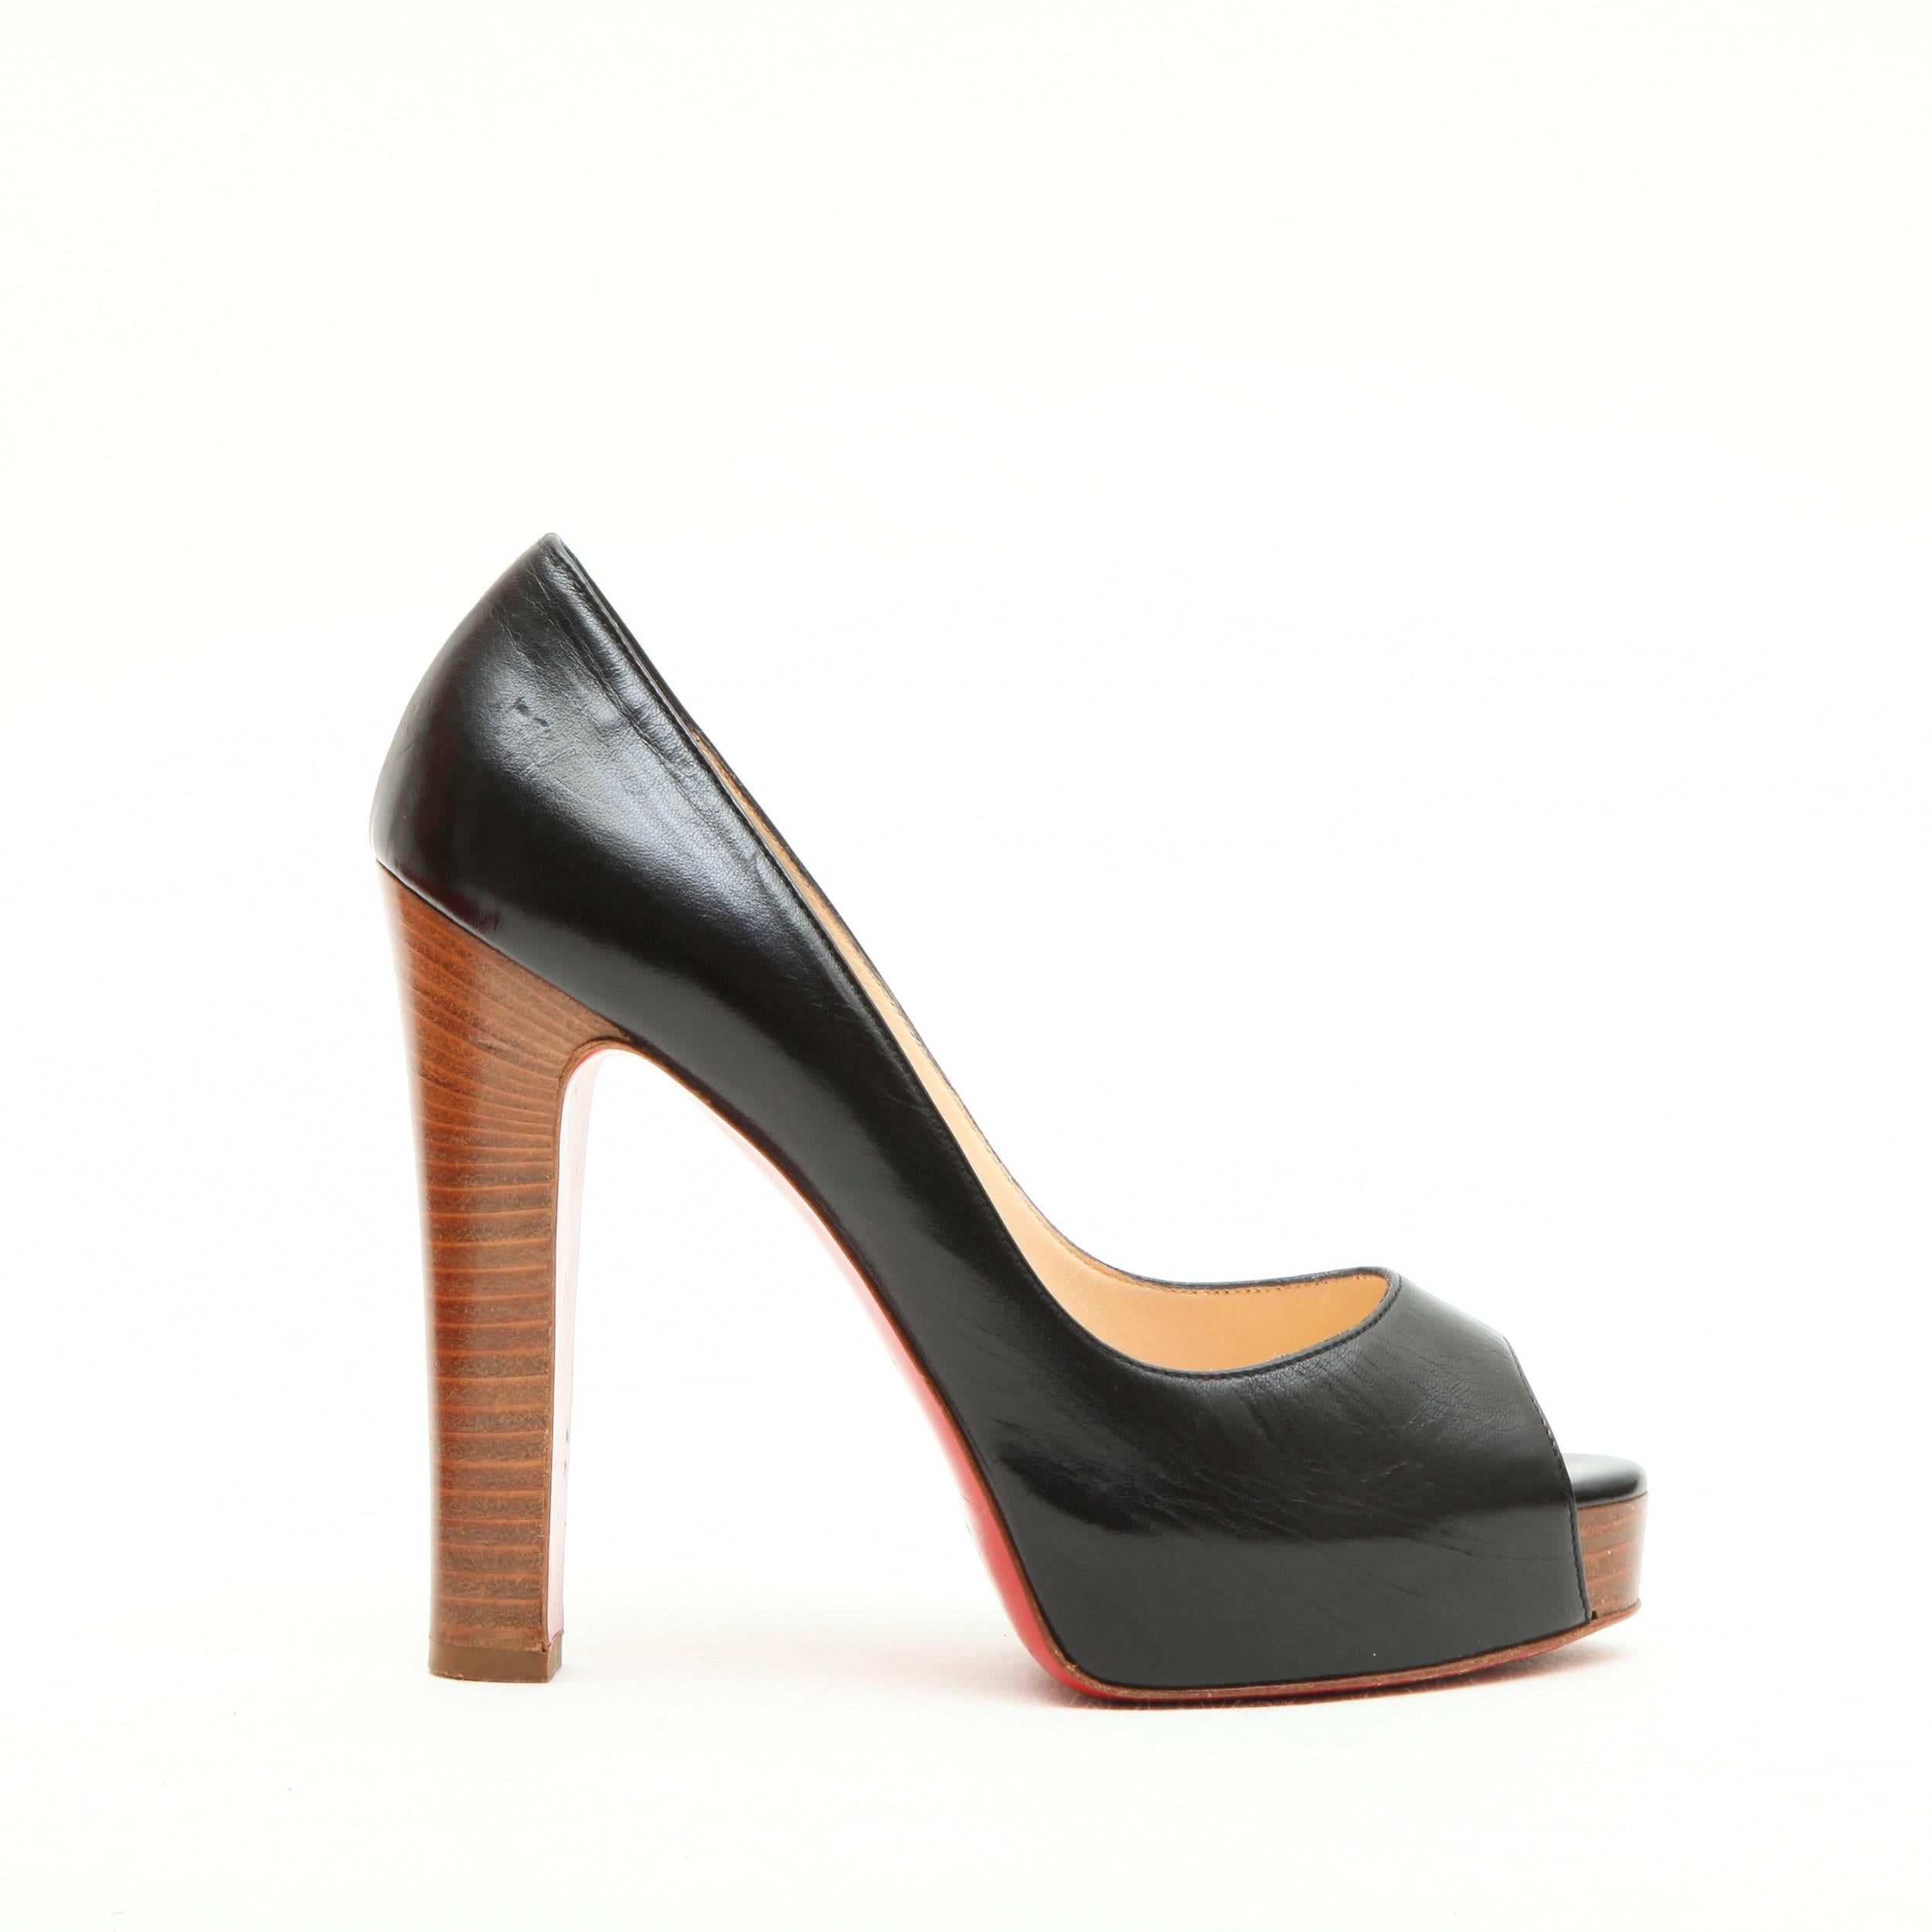 which are the best louboutin high heeled sandals